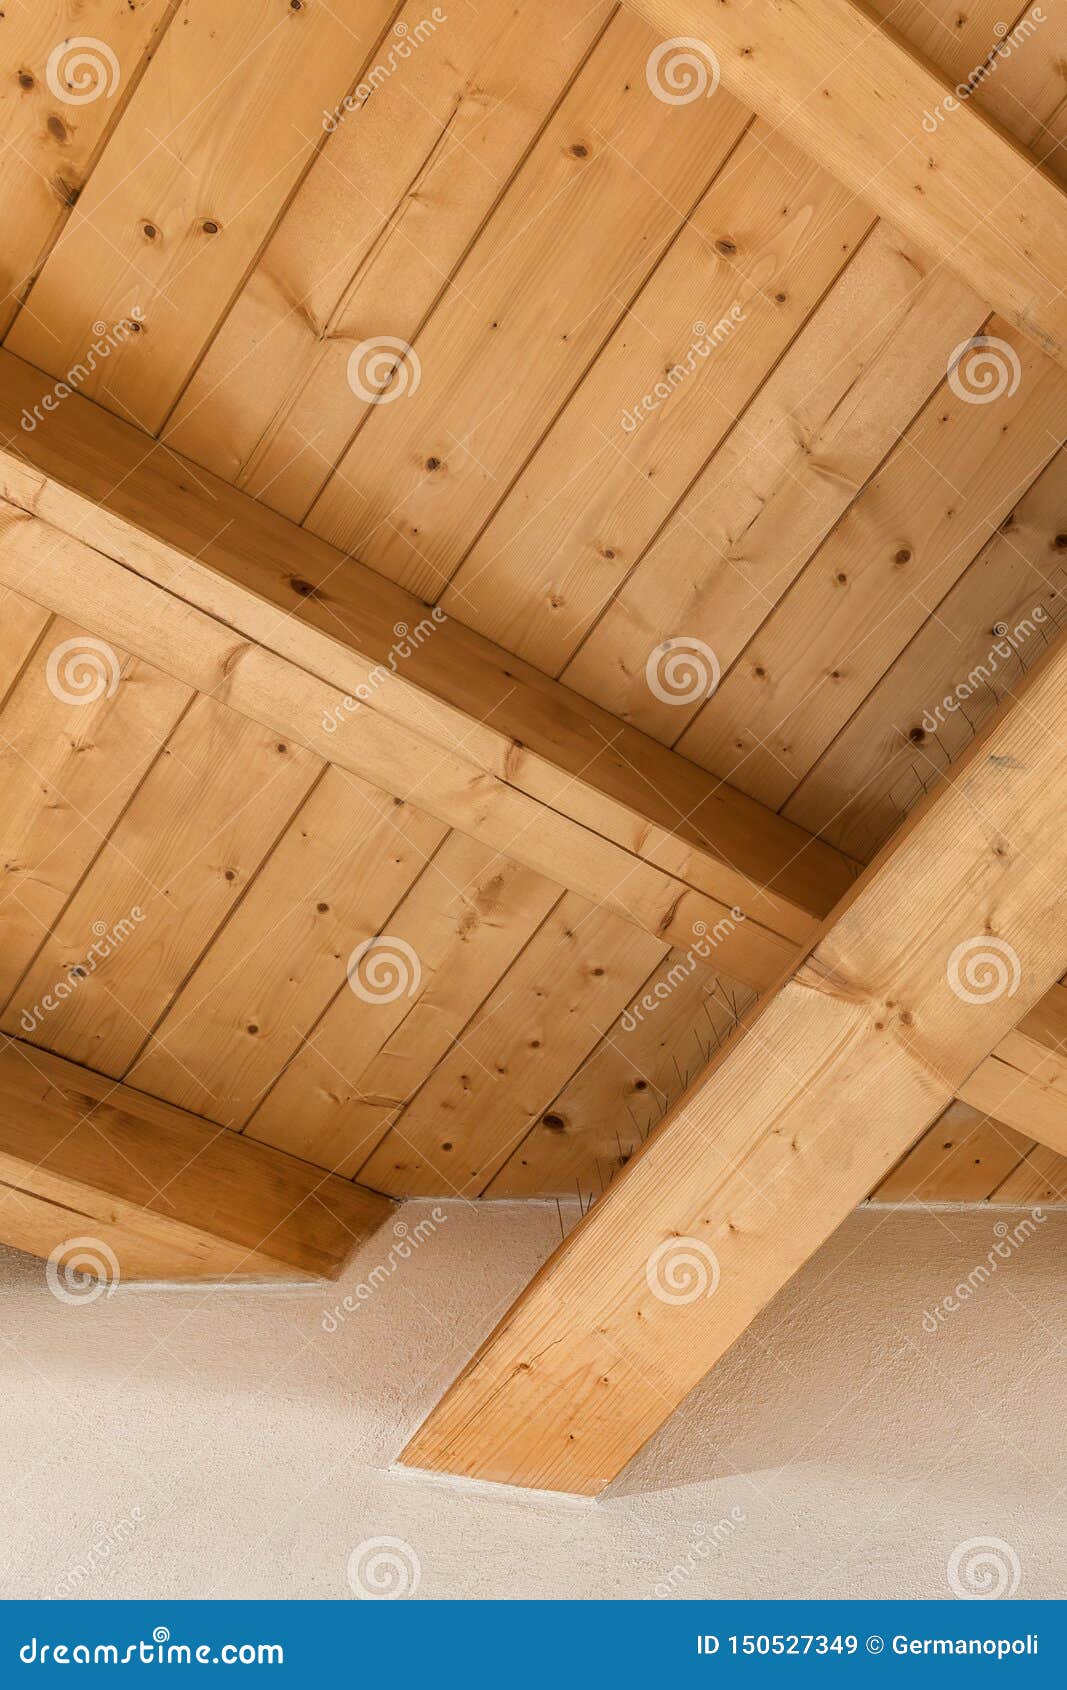 Wooden Ceiling With Exposed Beams Stock Image Image Of Carpentry